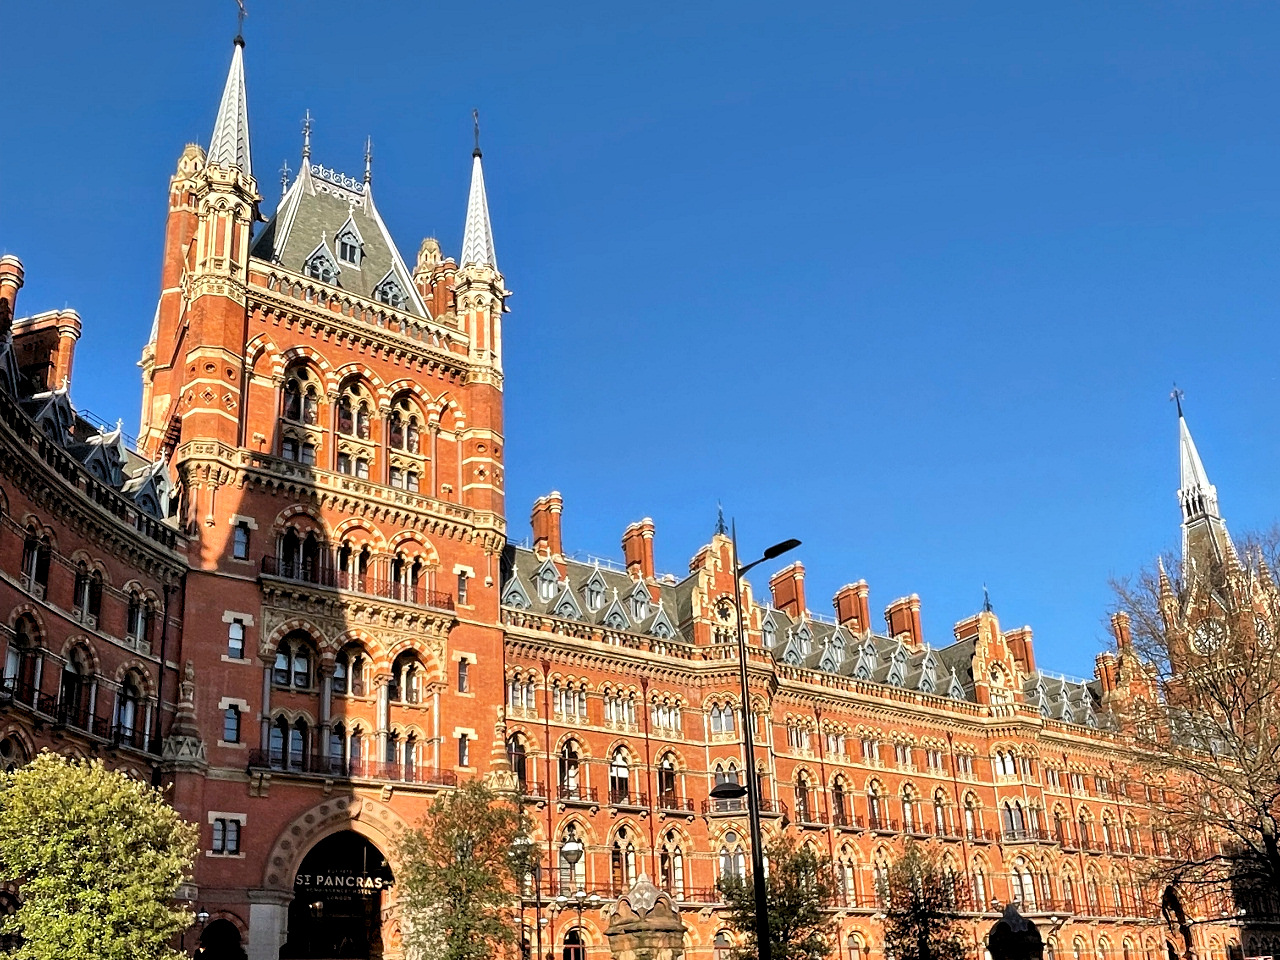 St Pancras hotel frontage